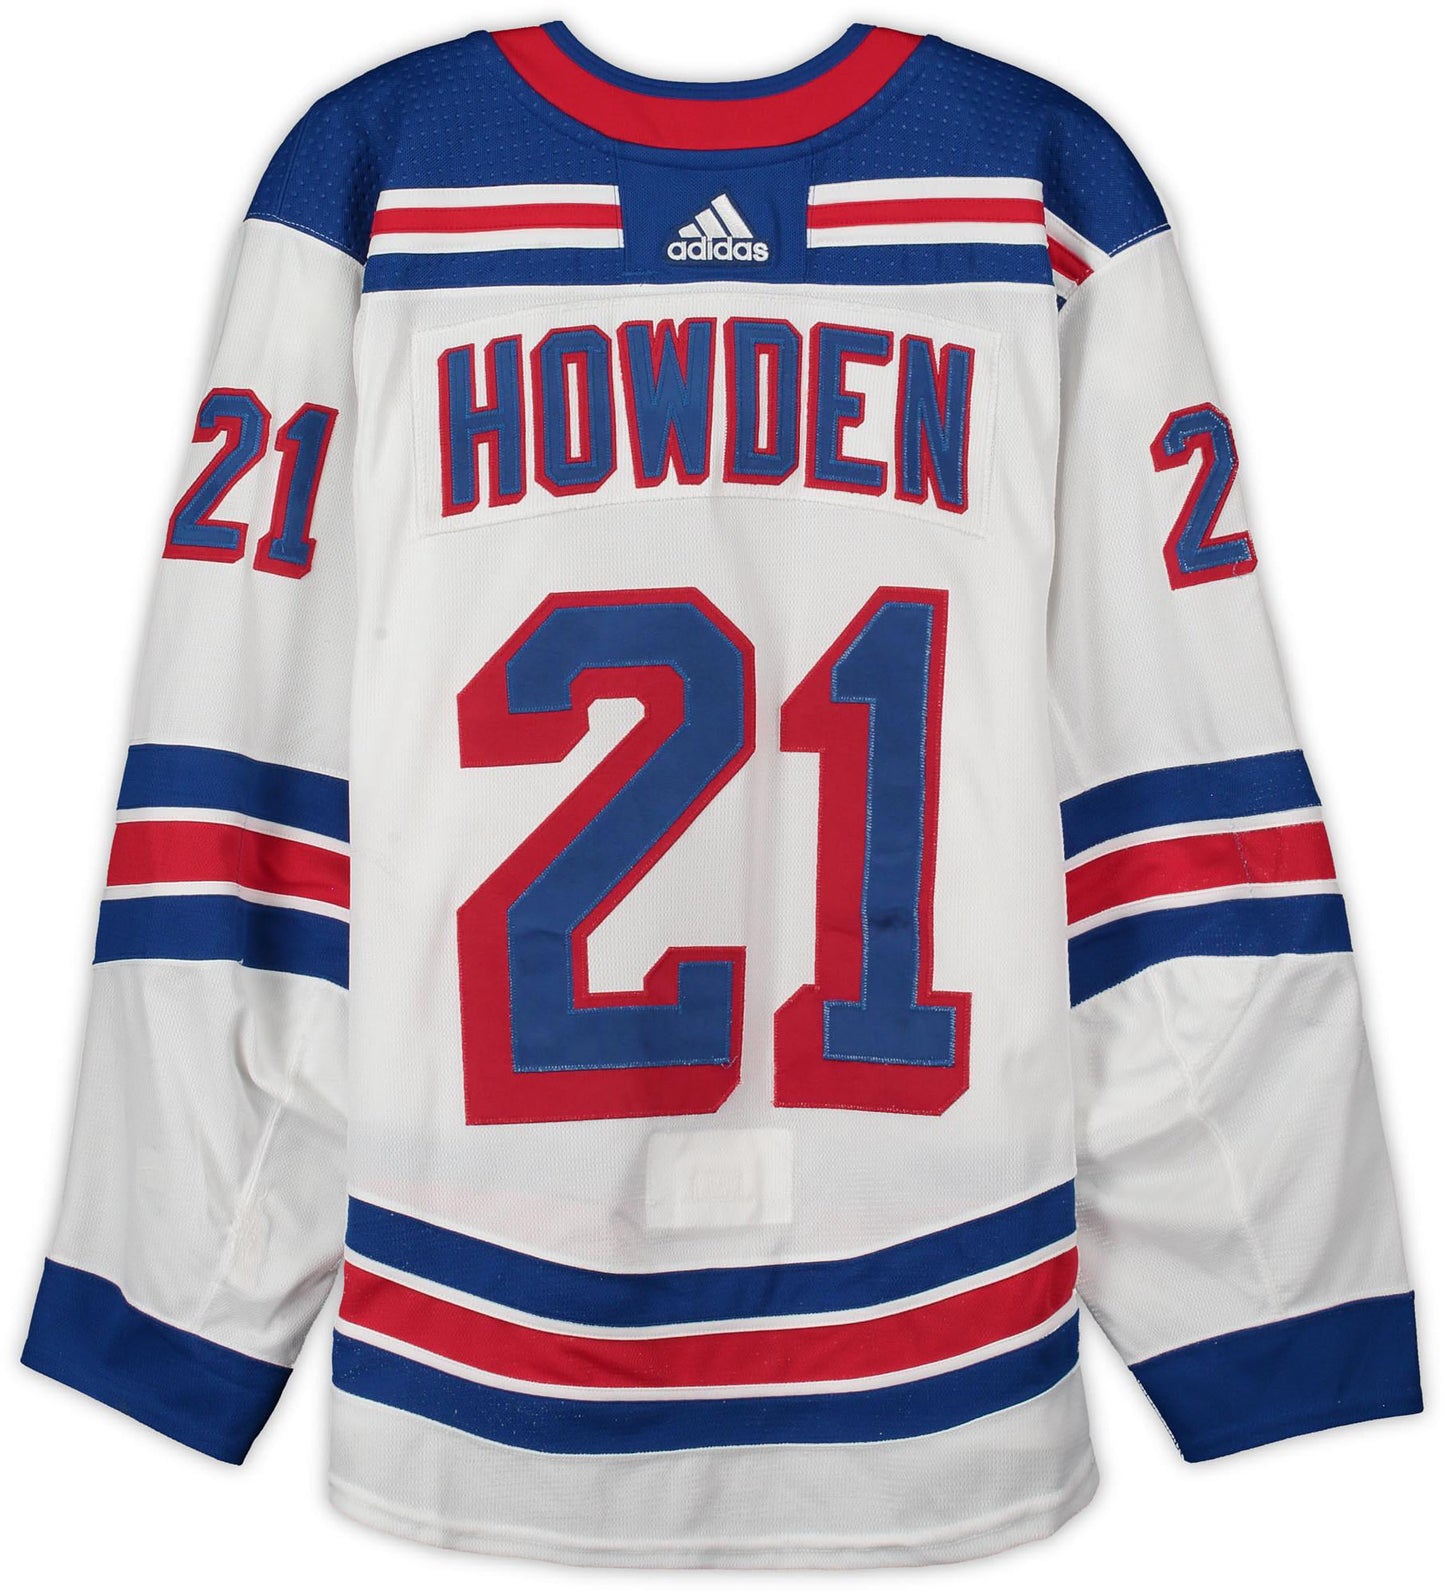 Brett Howden New York Rangers Game-Used #21 White Set 1 Jersey Worn During Away Games Played Between October 13th and December 16th of the 2019-20 NHL Season - Size 56 - Fanatics Authentic Certified